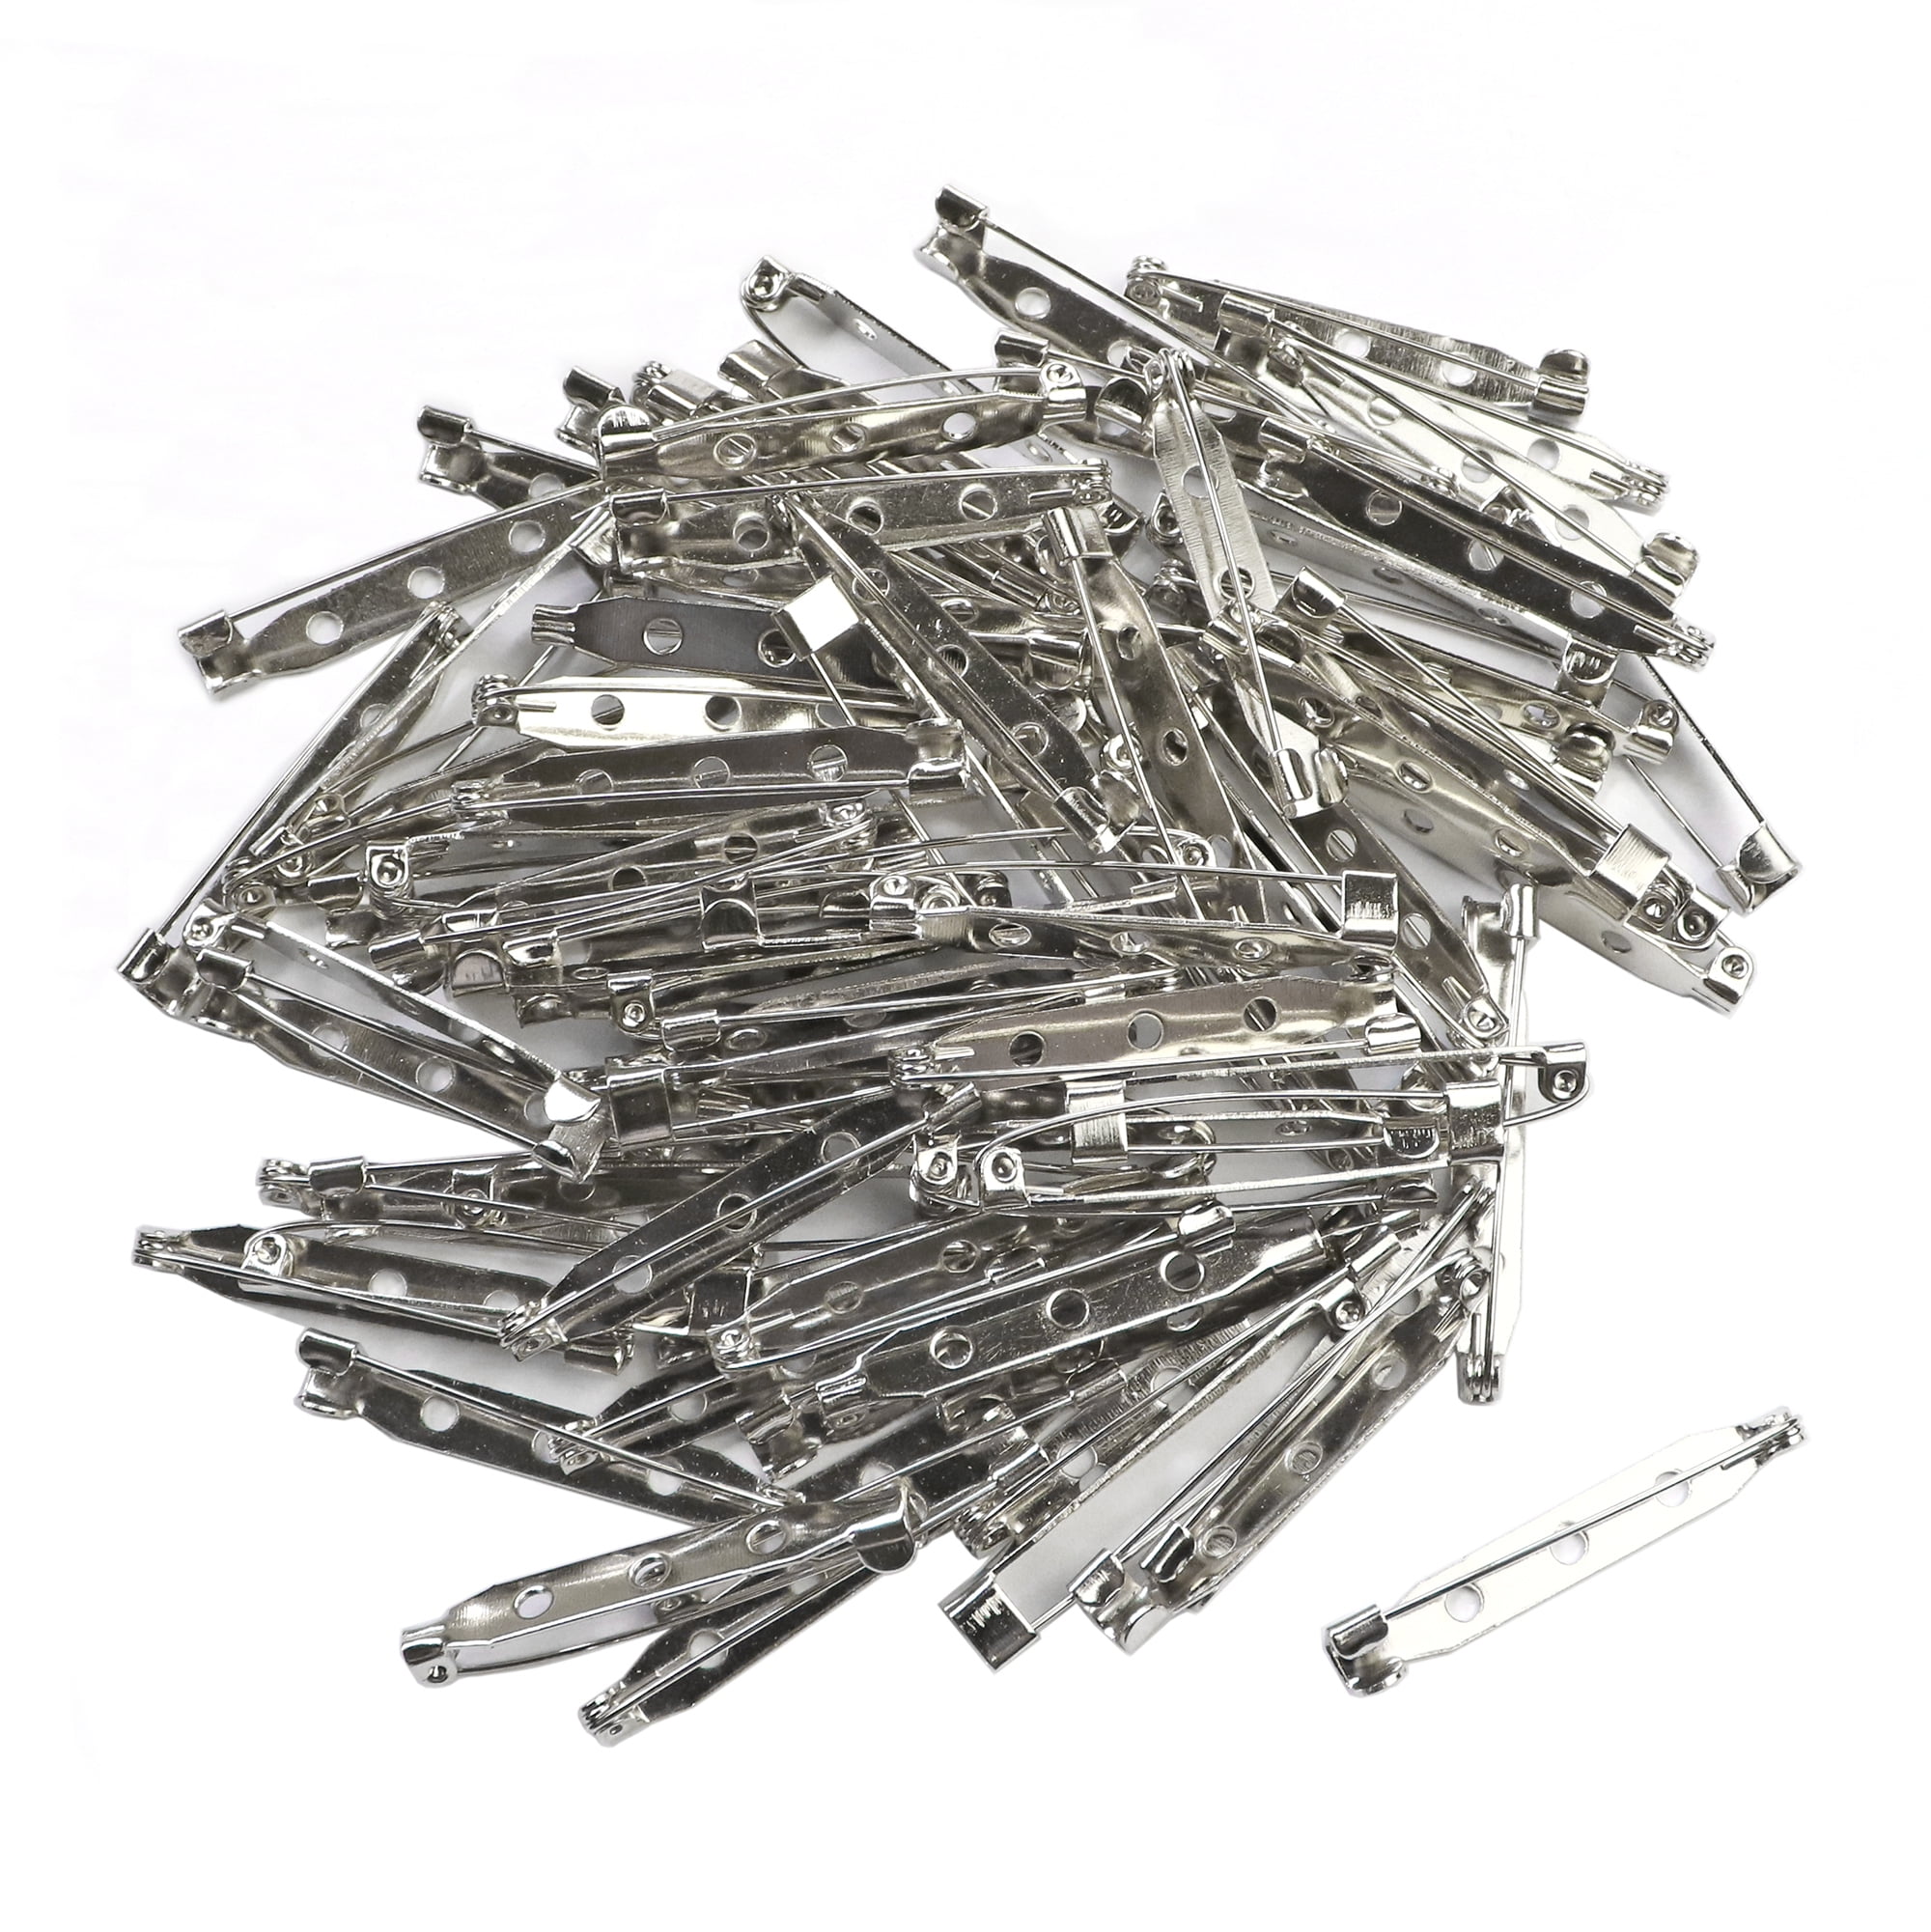 Shappy 100 Pieces Bar Pins Brooch Pin Backs Safety Clasp with Plastic Box, 4 Sizes 20 mm, 25 mm, 32 mm and 38 mm (Gold and Silver)